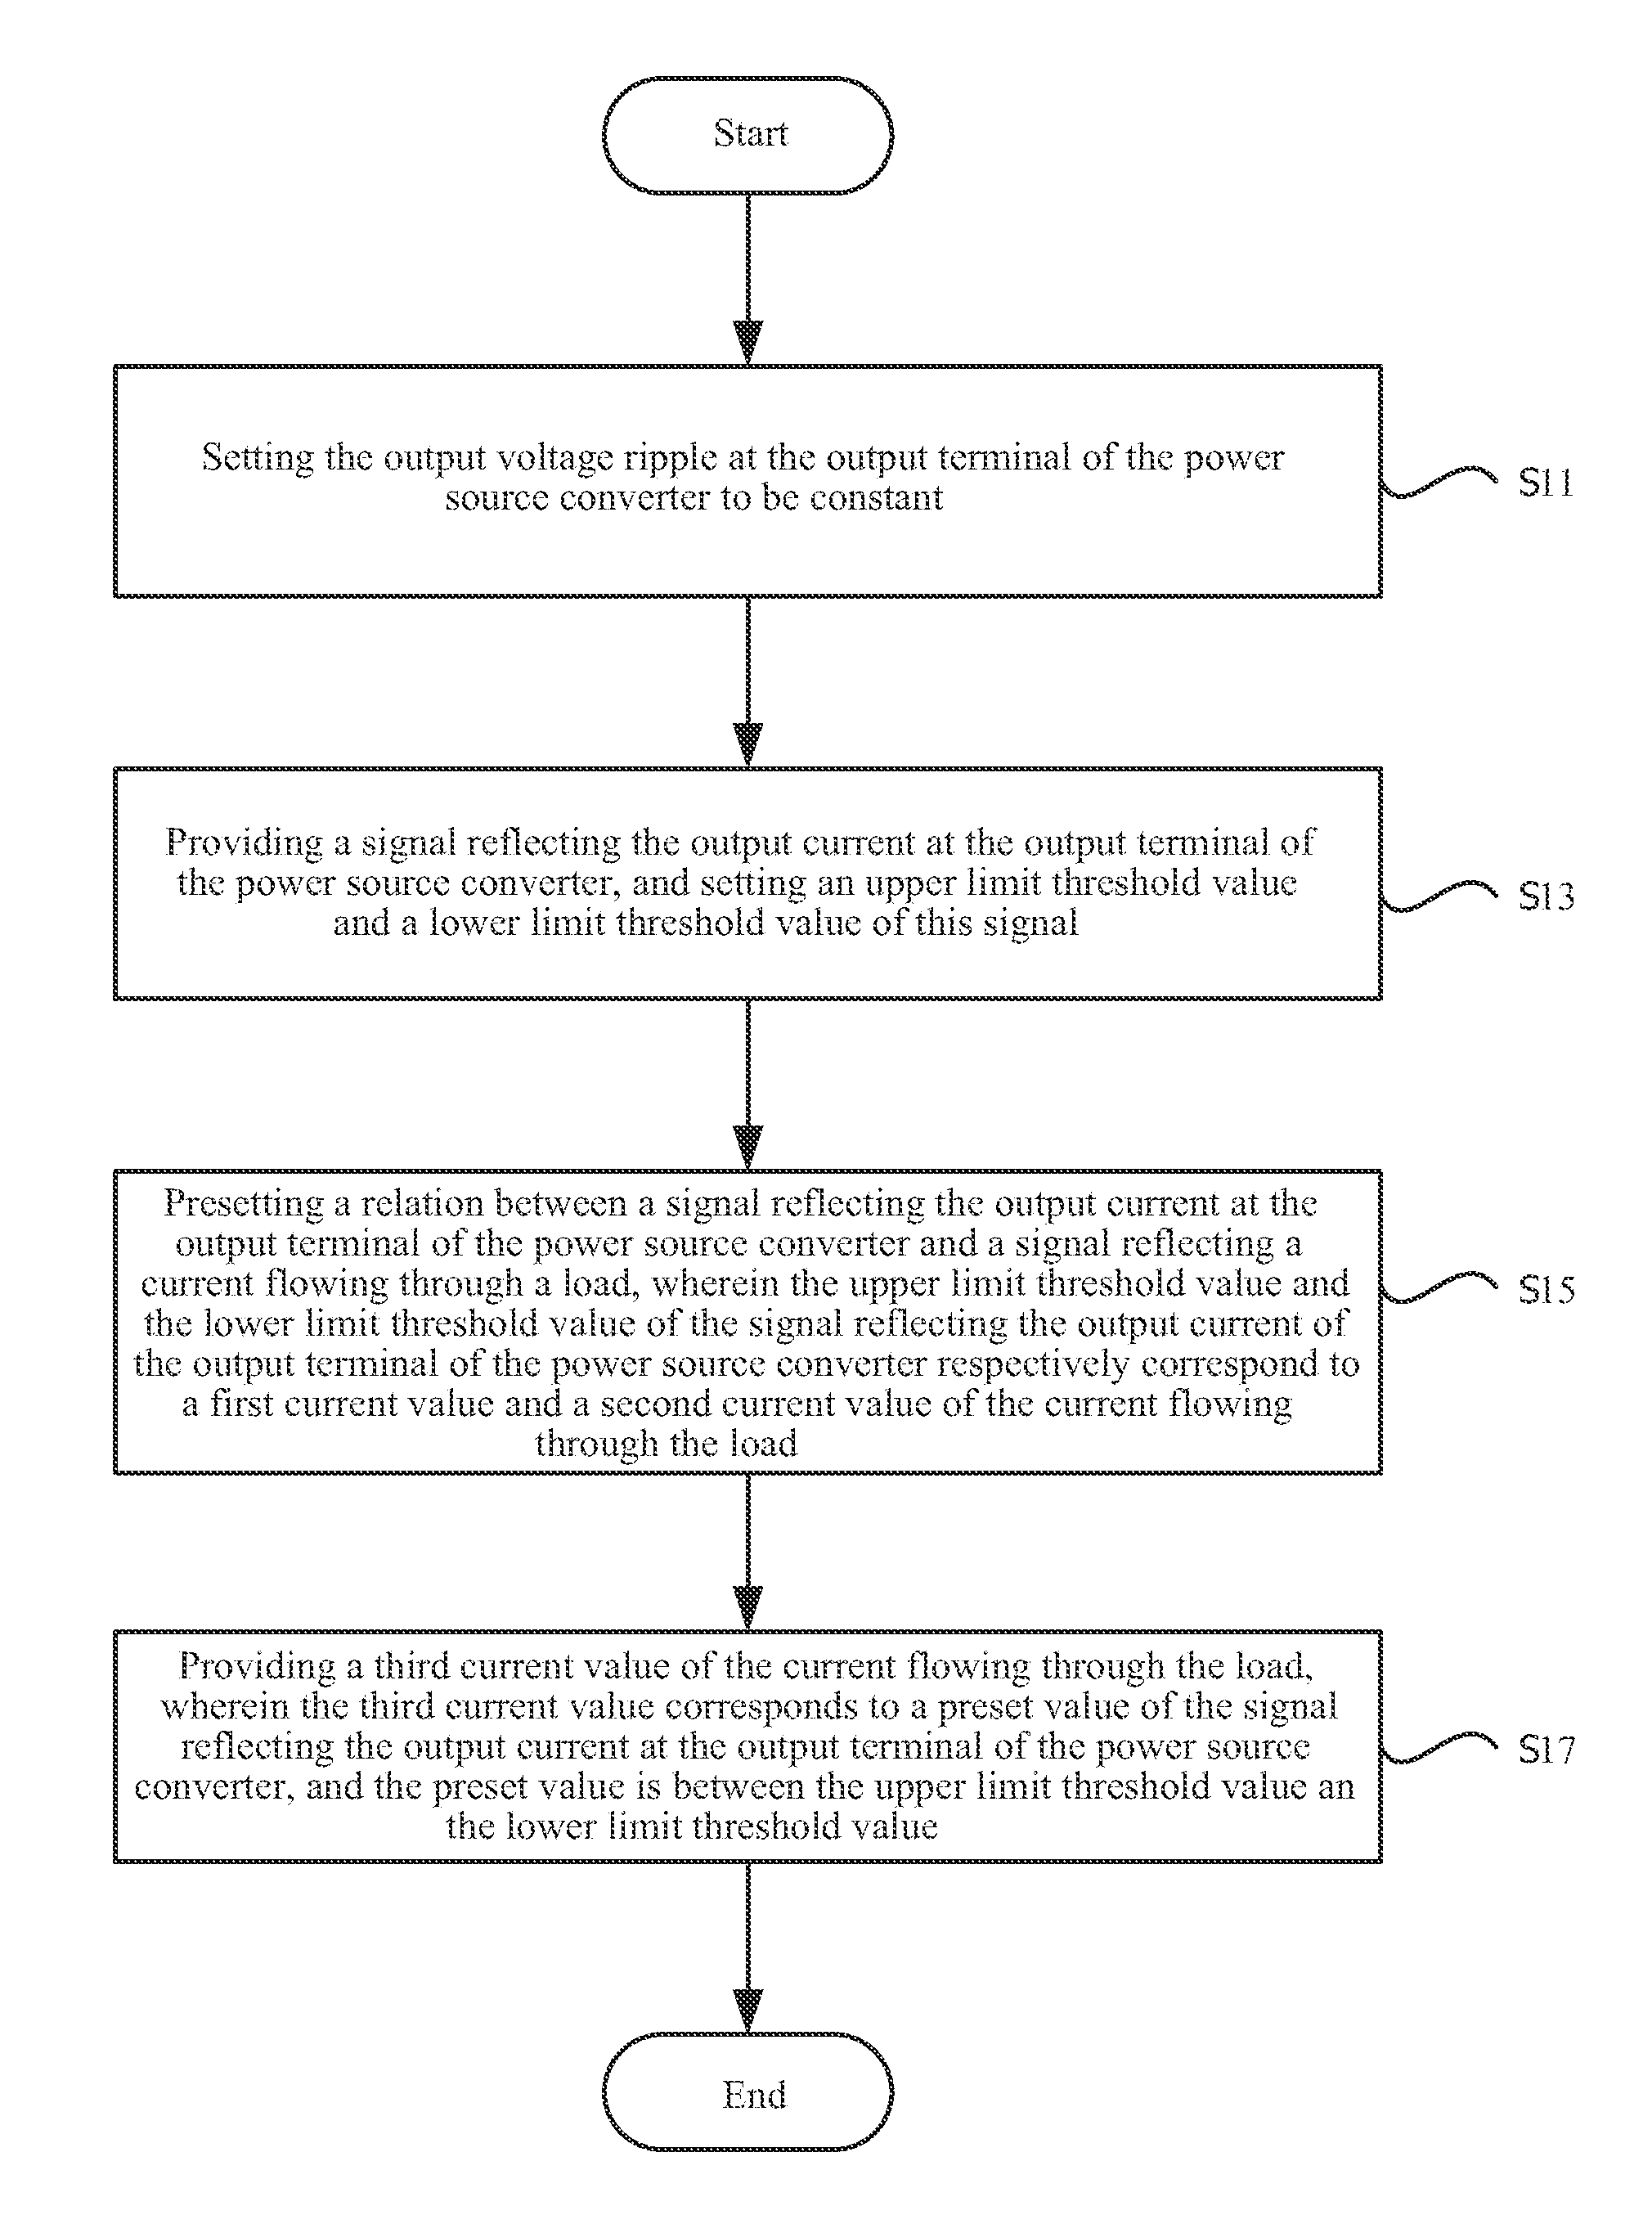 Control method for reducing the audio noise